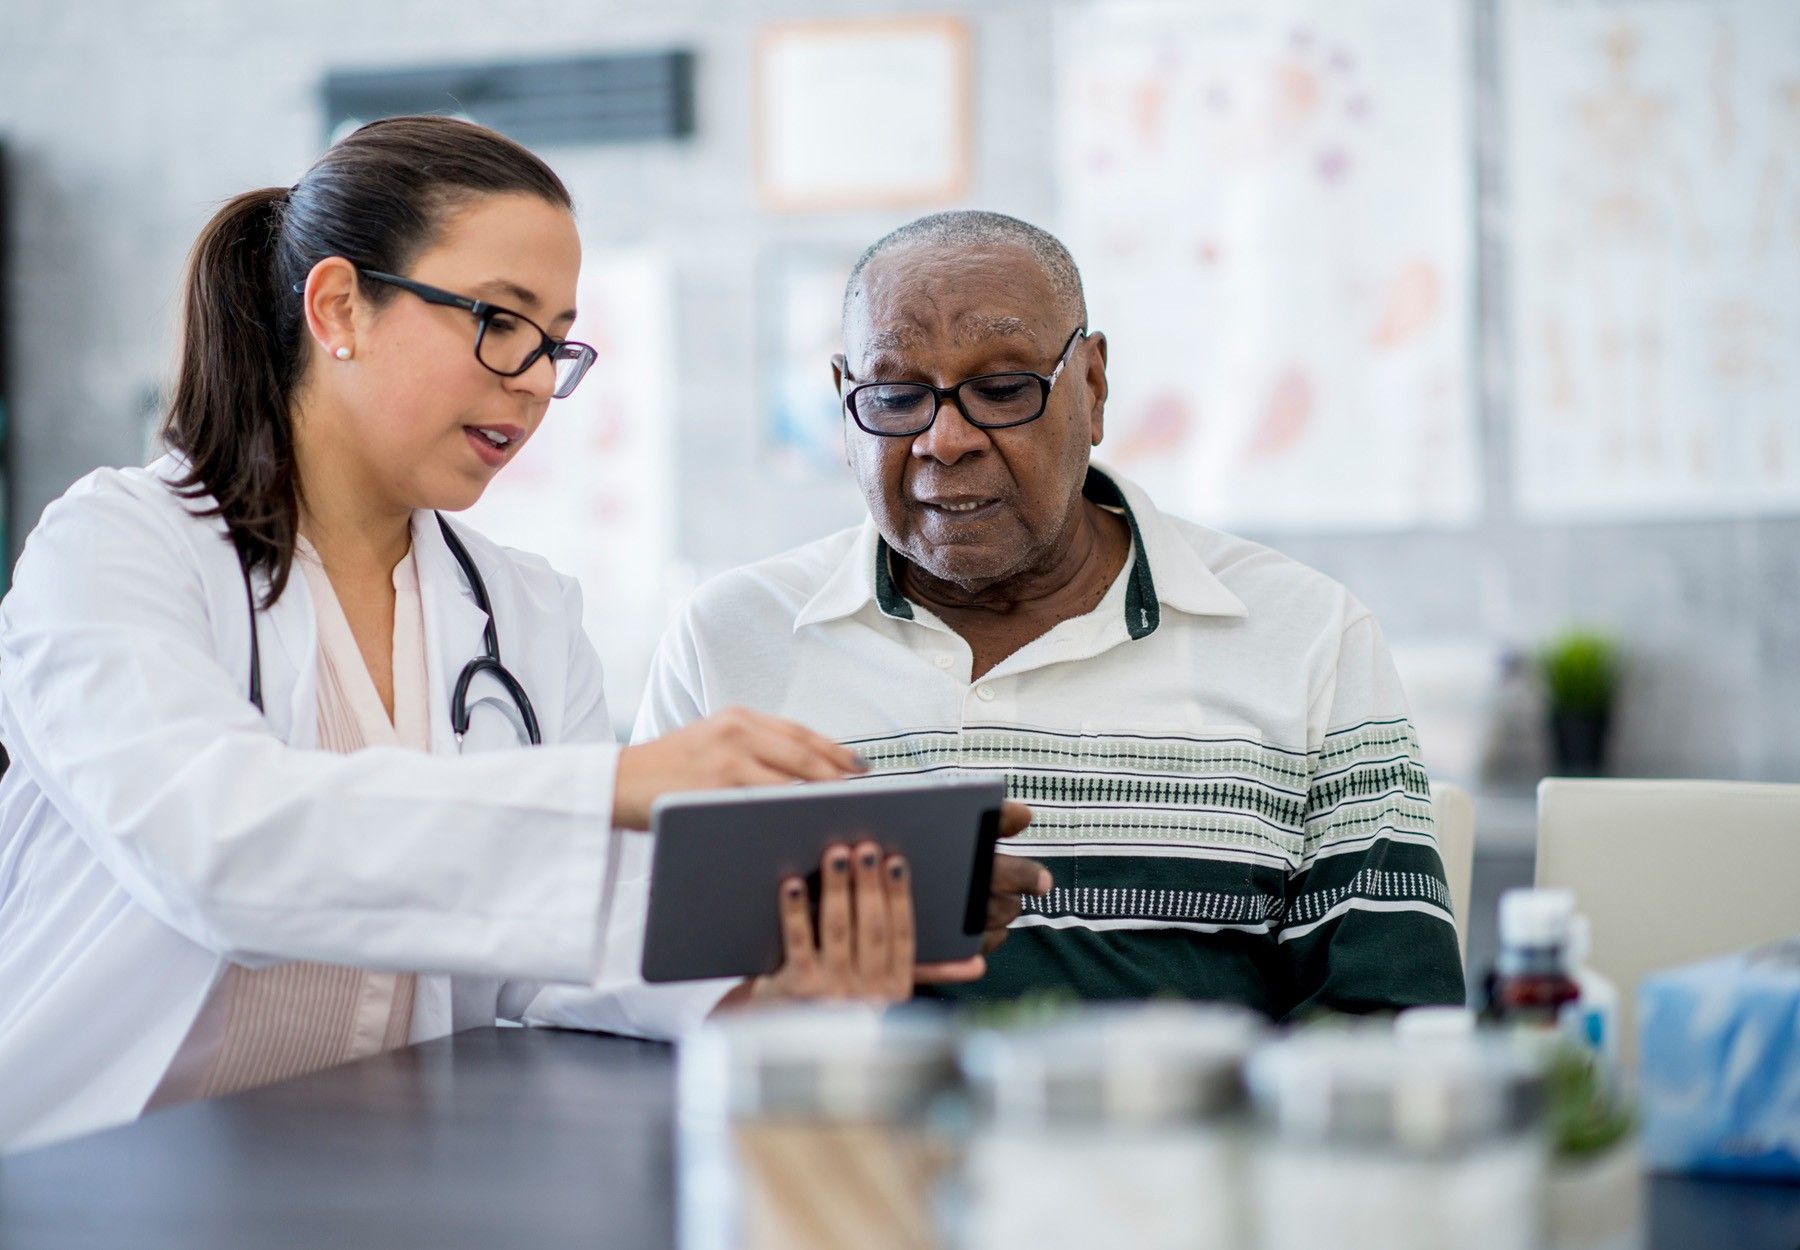 A White doctor shares something on a tablet with an elderly Black patient